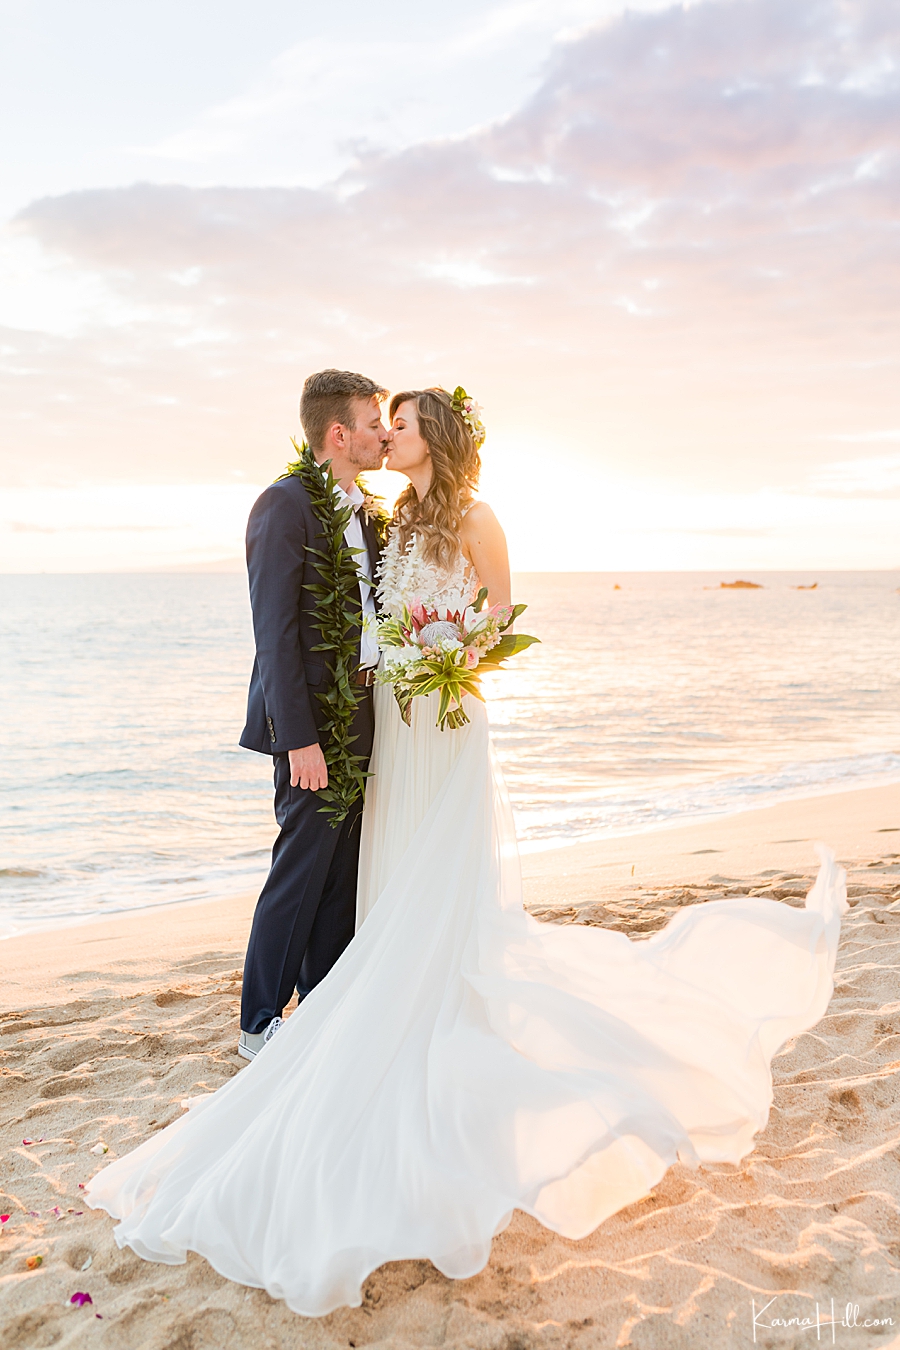 Maui wedding packages